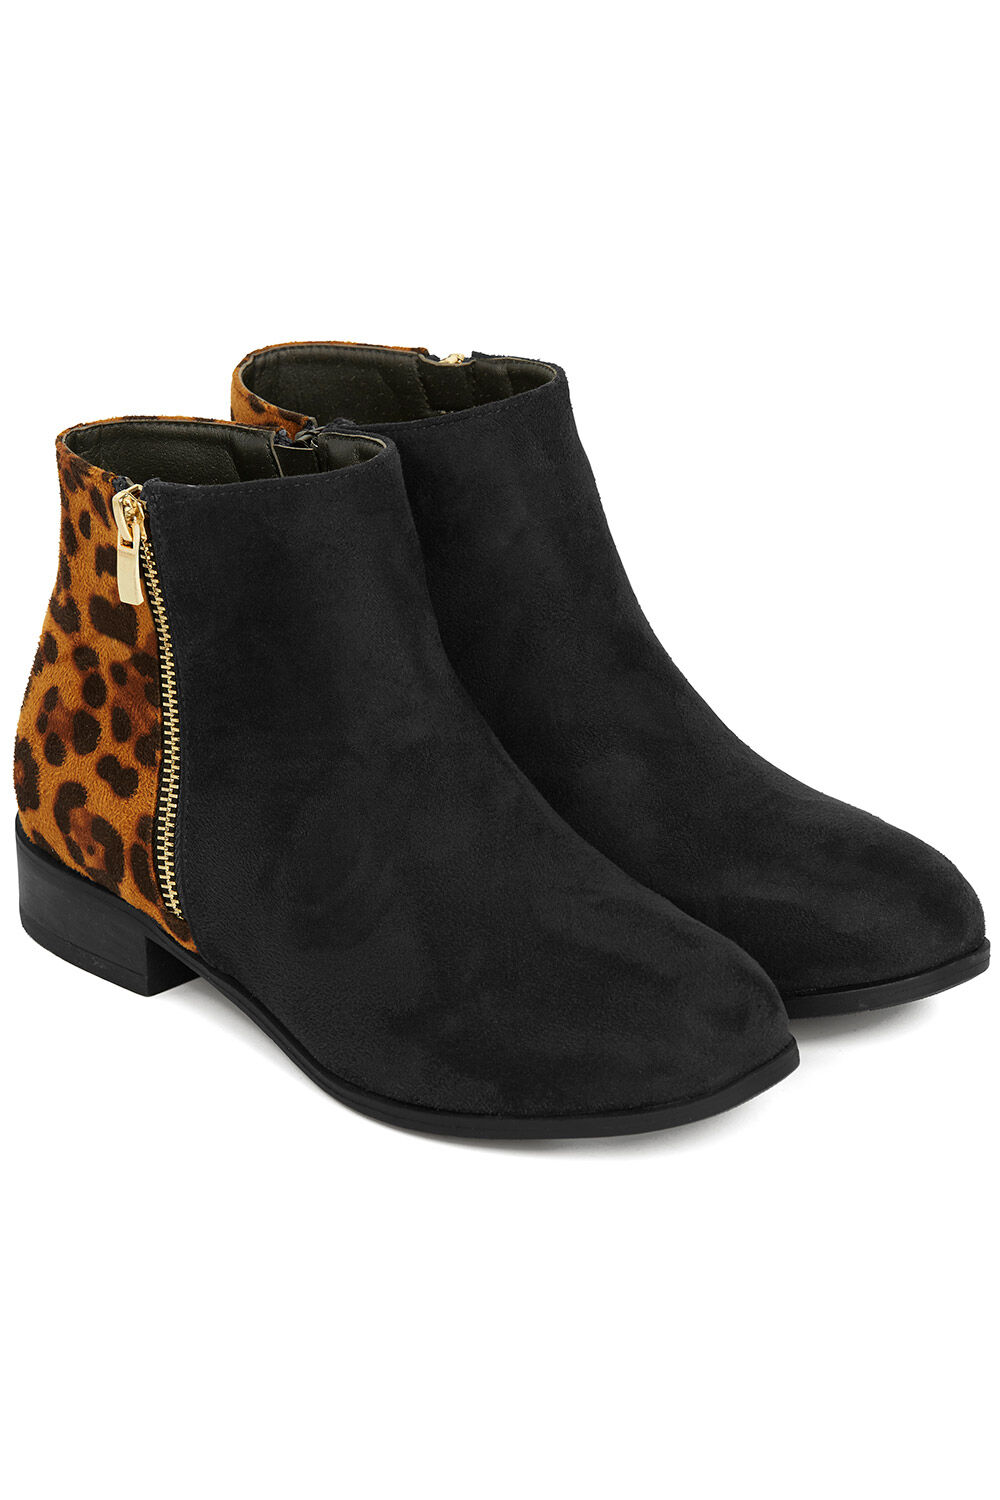 krush ankle boots